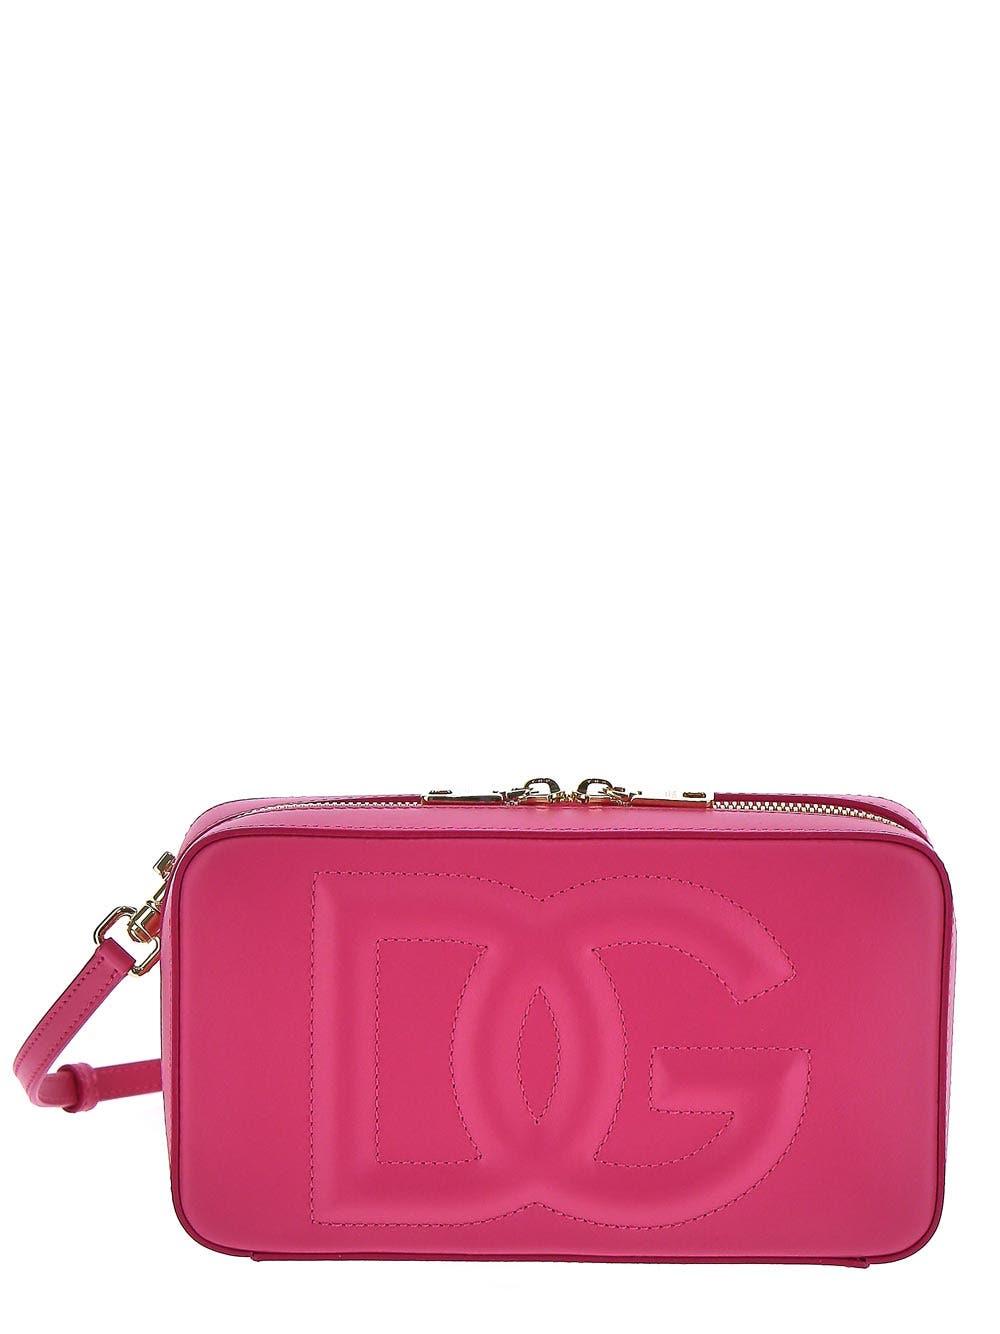 Dolce & Gabbana Small Dg Camera Bag in Pink | Lyst